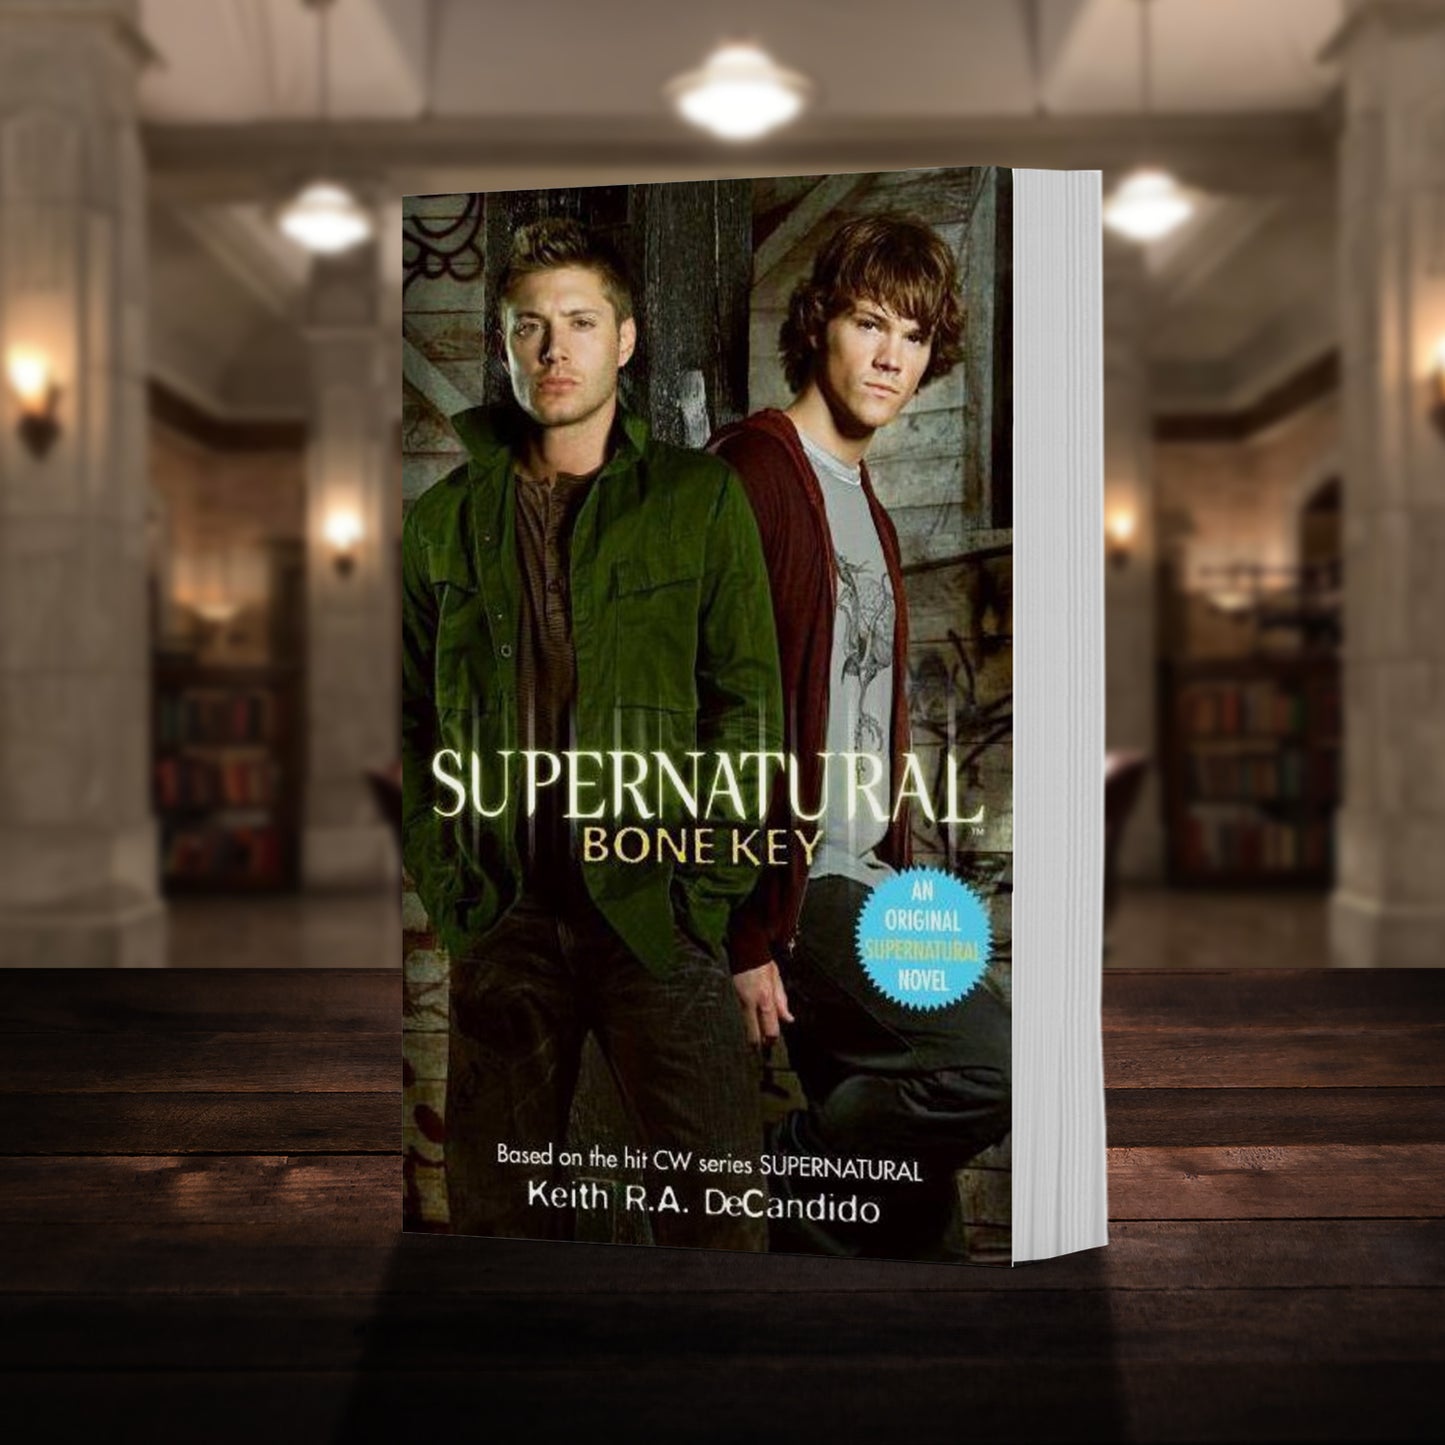 A copy of the book "Supernatural: Bone Key" pictured in the "bunker" from Supernatural. The cover shows early-season Sam and Dean Winchester and reads "Supernatural Bone Key - Based on the hit CW series SUPERNATURAL by Keith R.A. DeCandido"